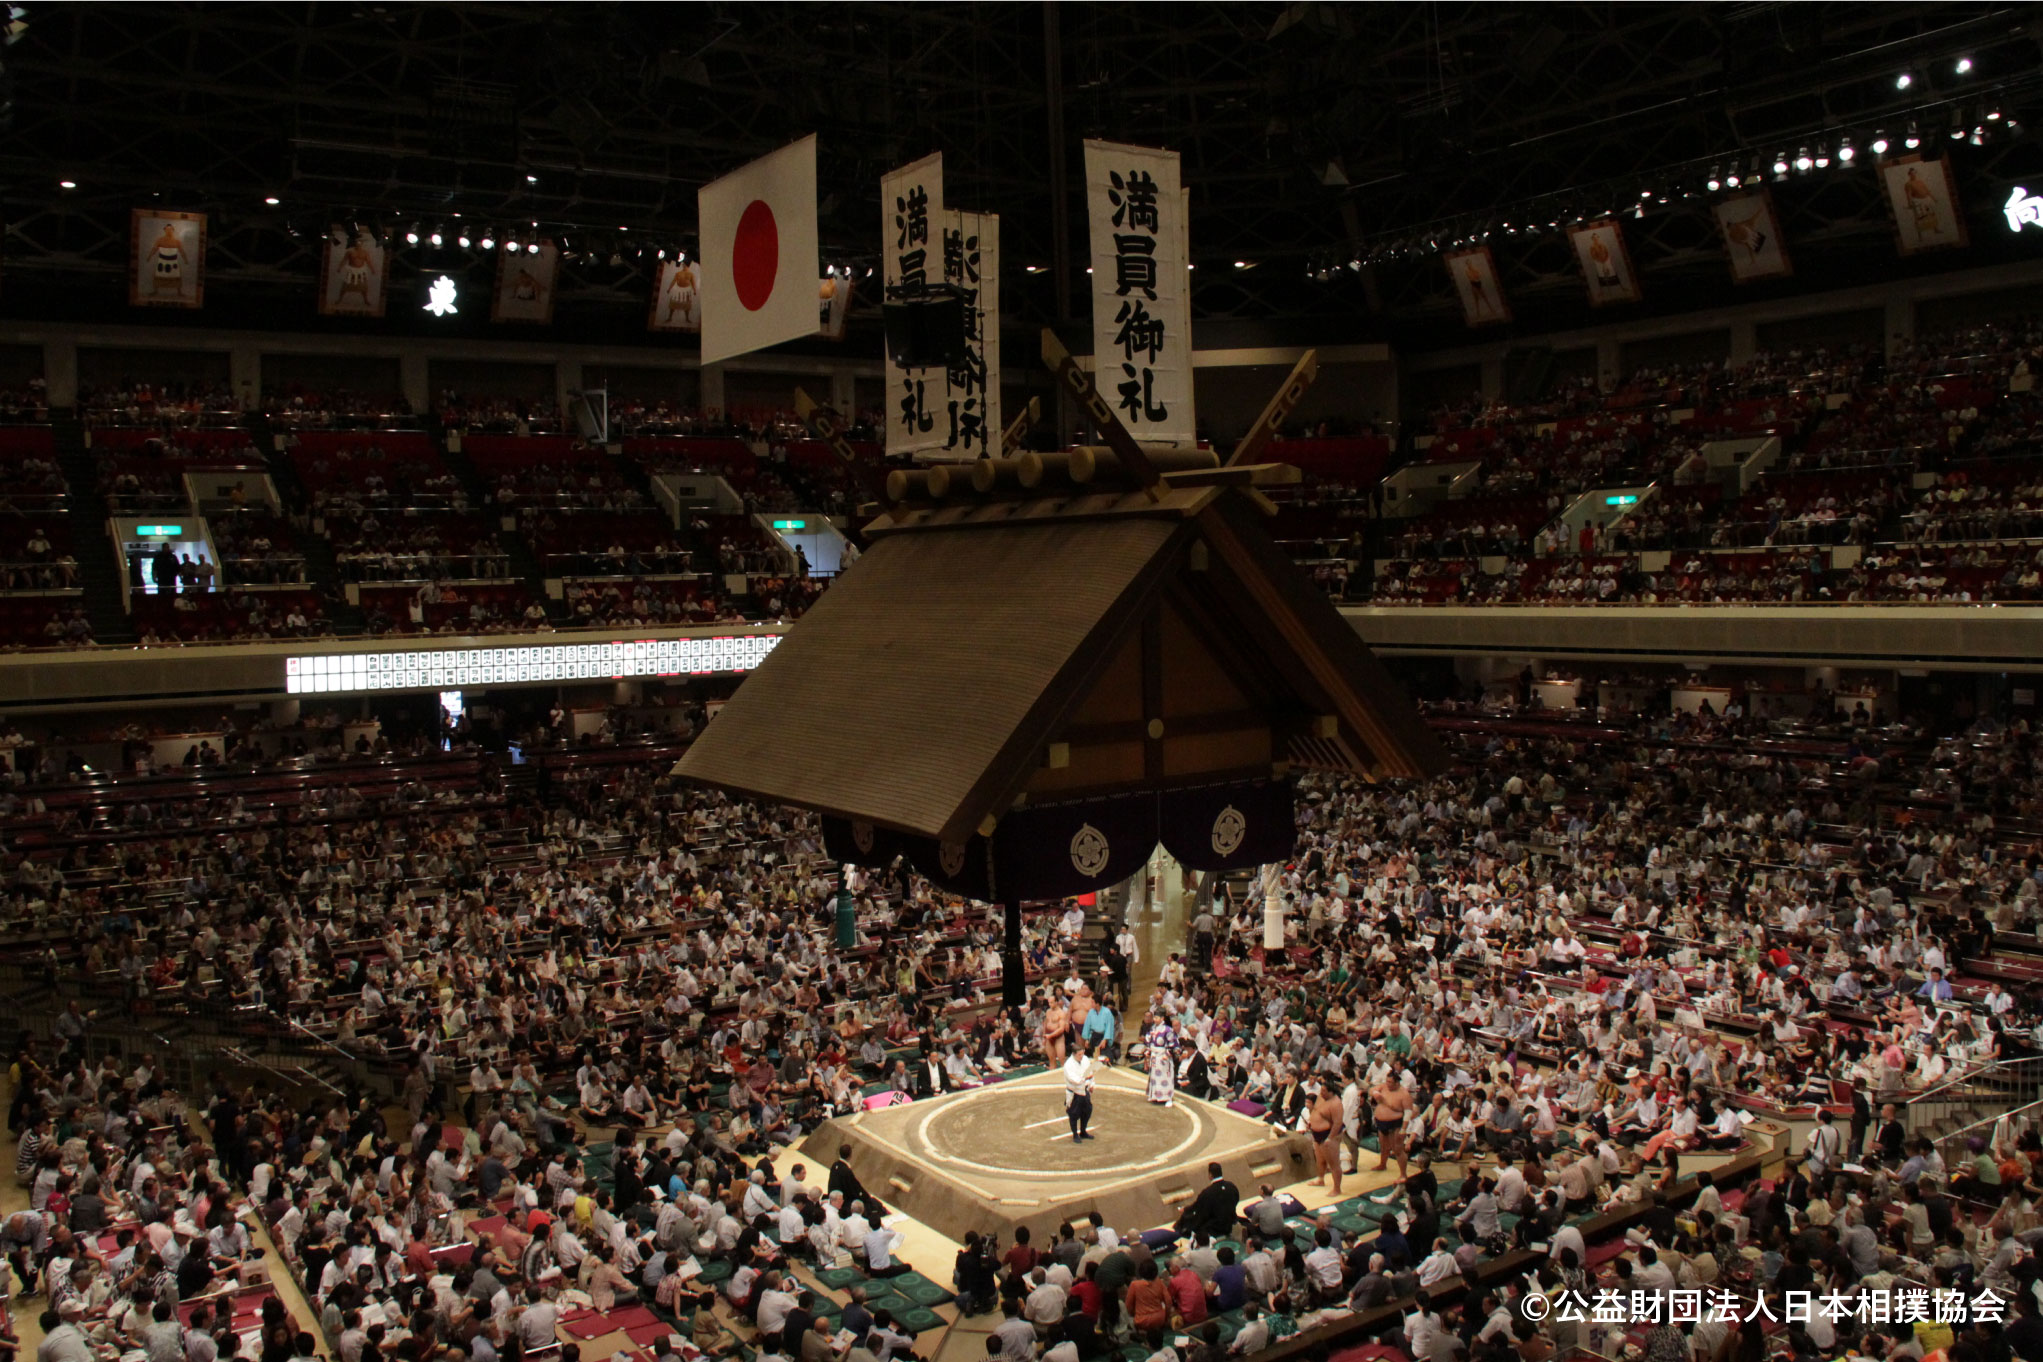 Tokyo Grand Sumo Tournament Viewing Tour (2nd Floor C-class Seat)